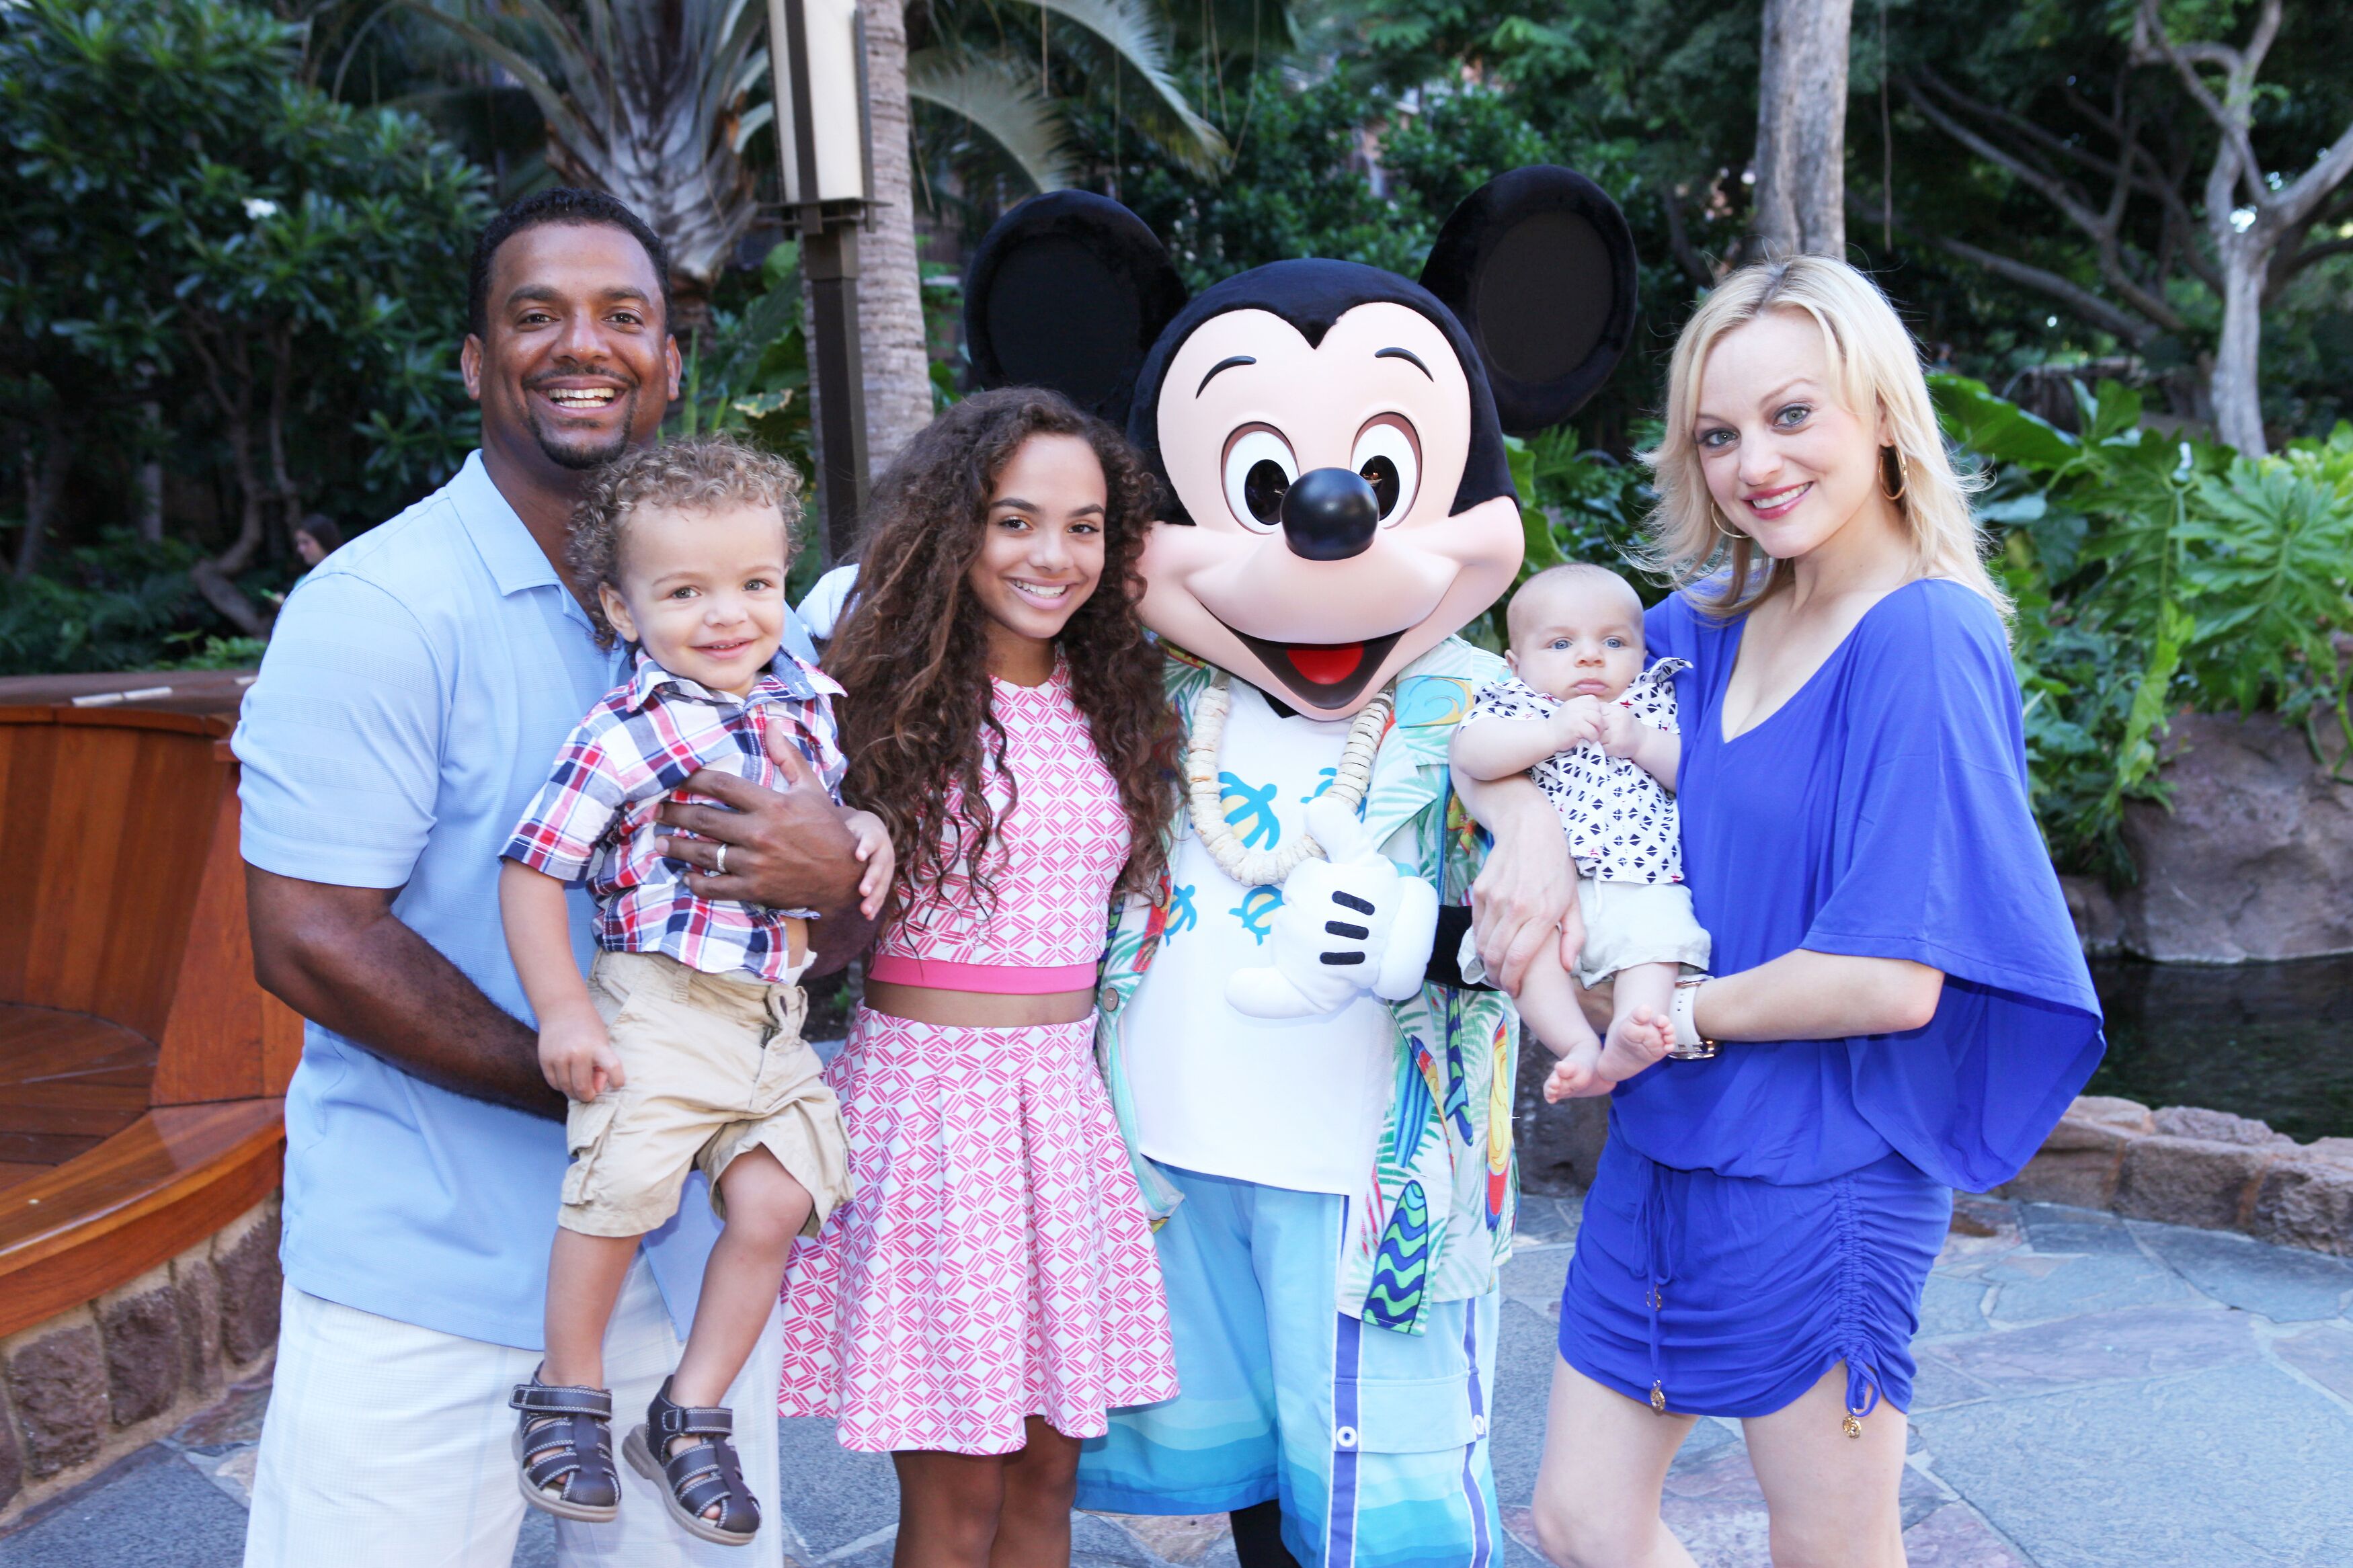 Alfonso and Angela Ribeiro with their children at Disneyland | Source: Getty Images/GlobalImagesUkraine